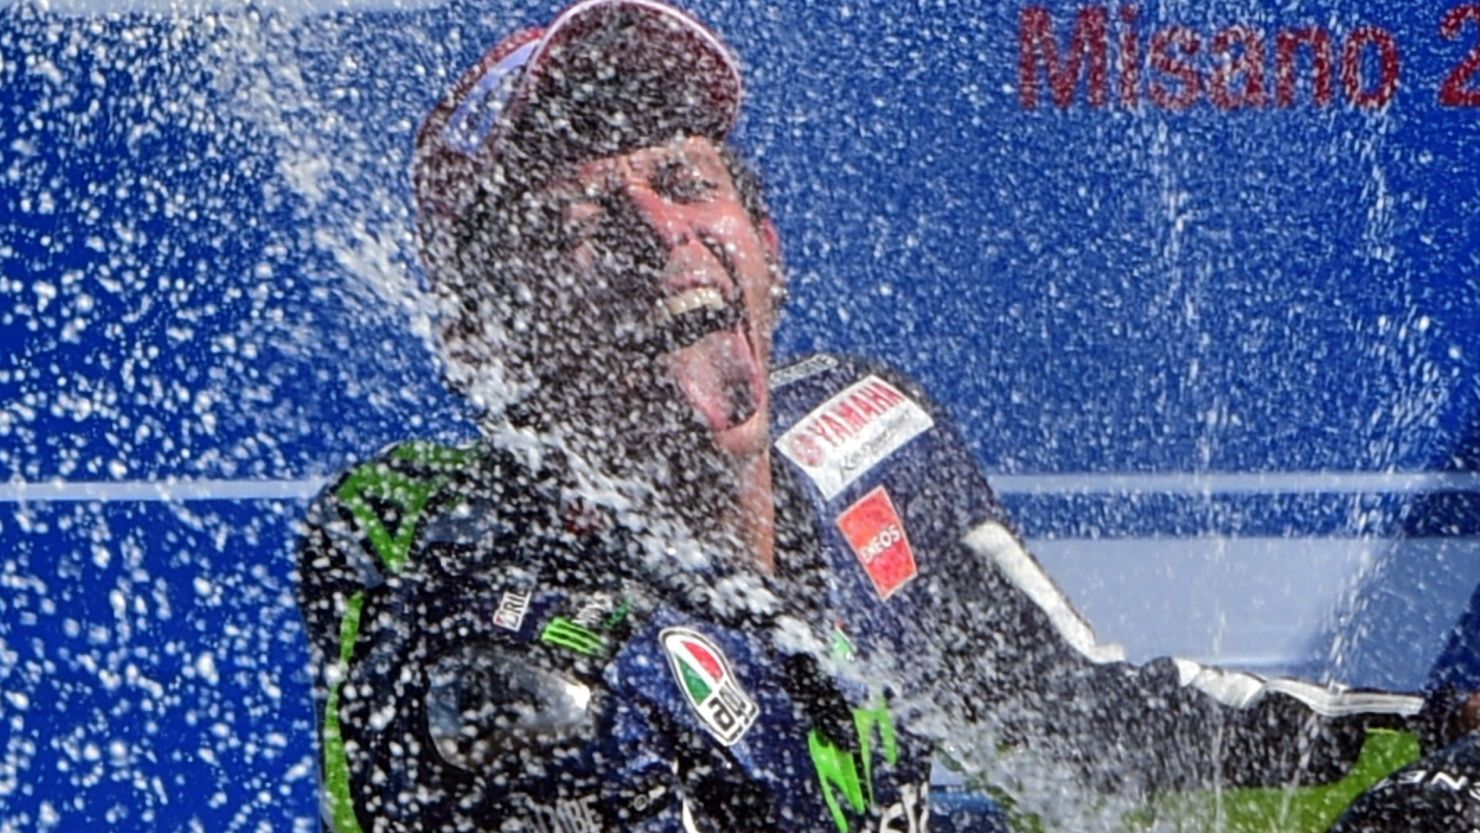 Valentino Rossi enjoys his champagne moment after claiming the San Marino MotoGP at Misano.